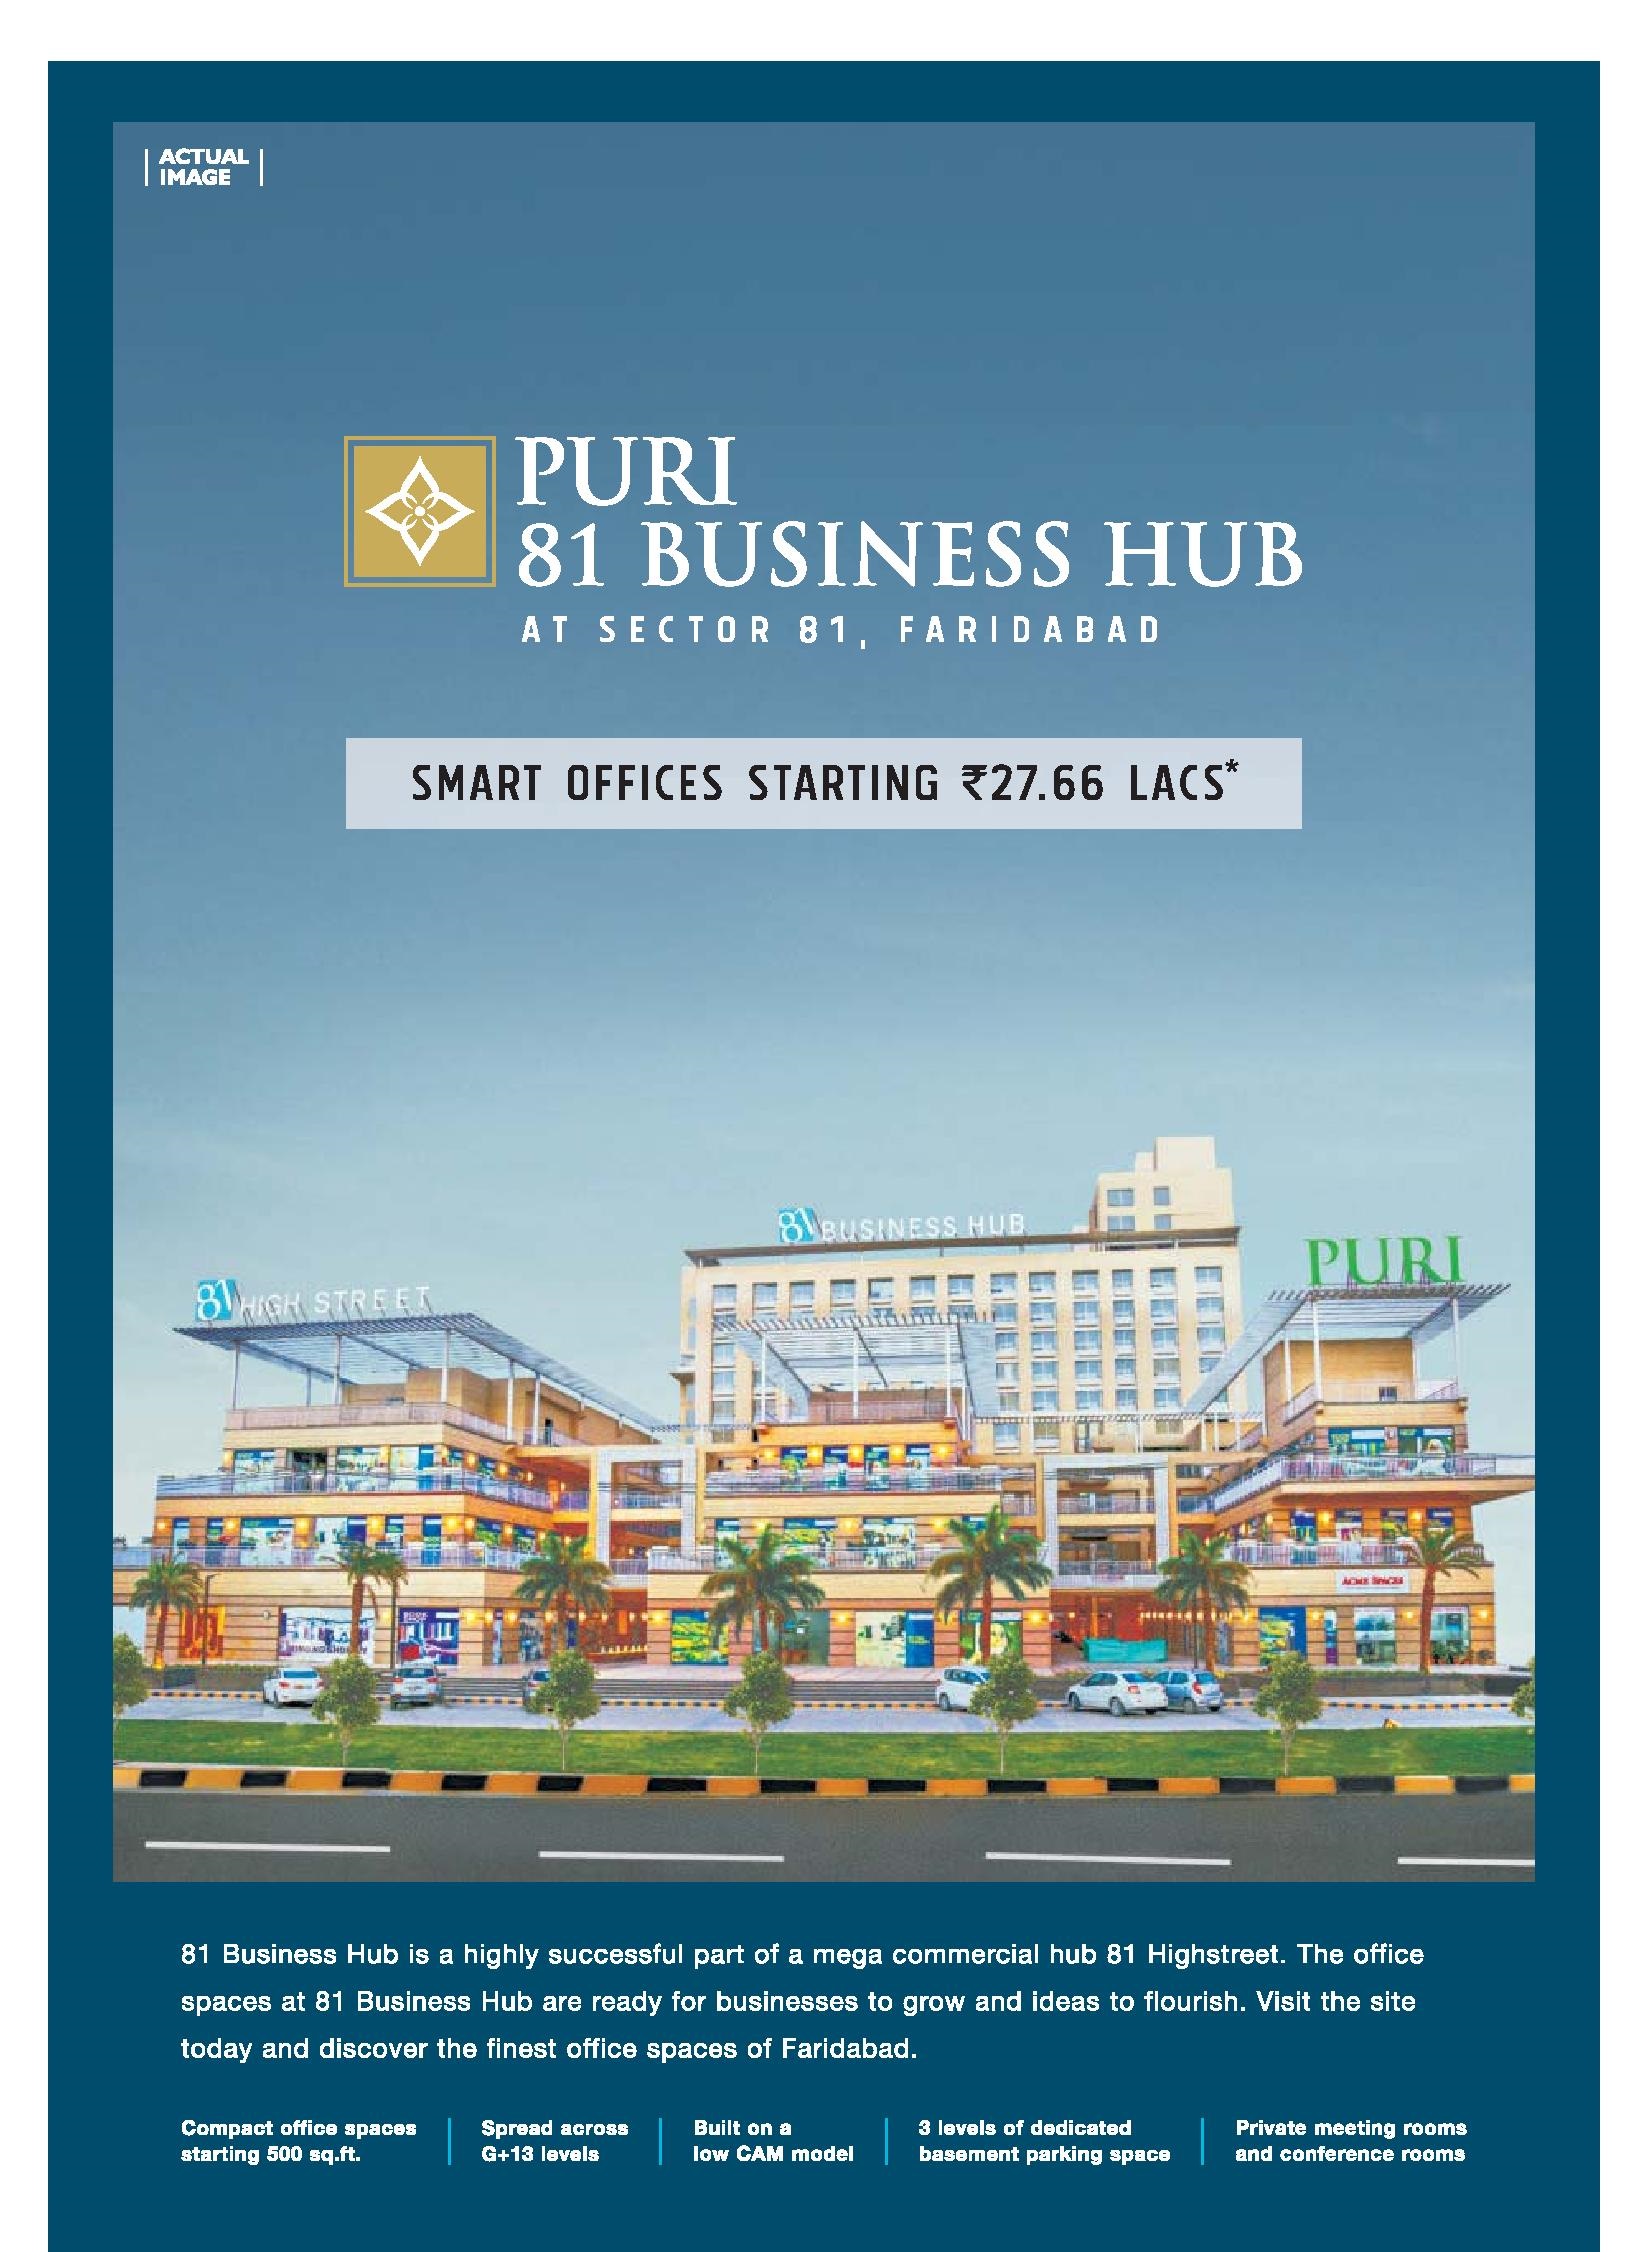 Invest in Puri 81 Business hub at Sector 81, Faridabad